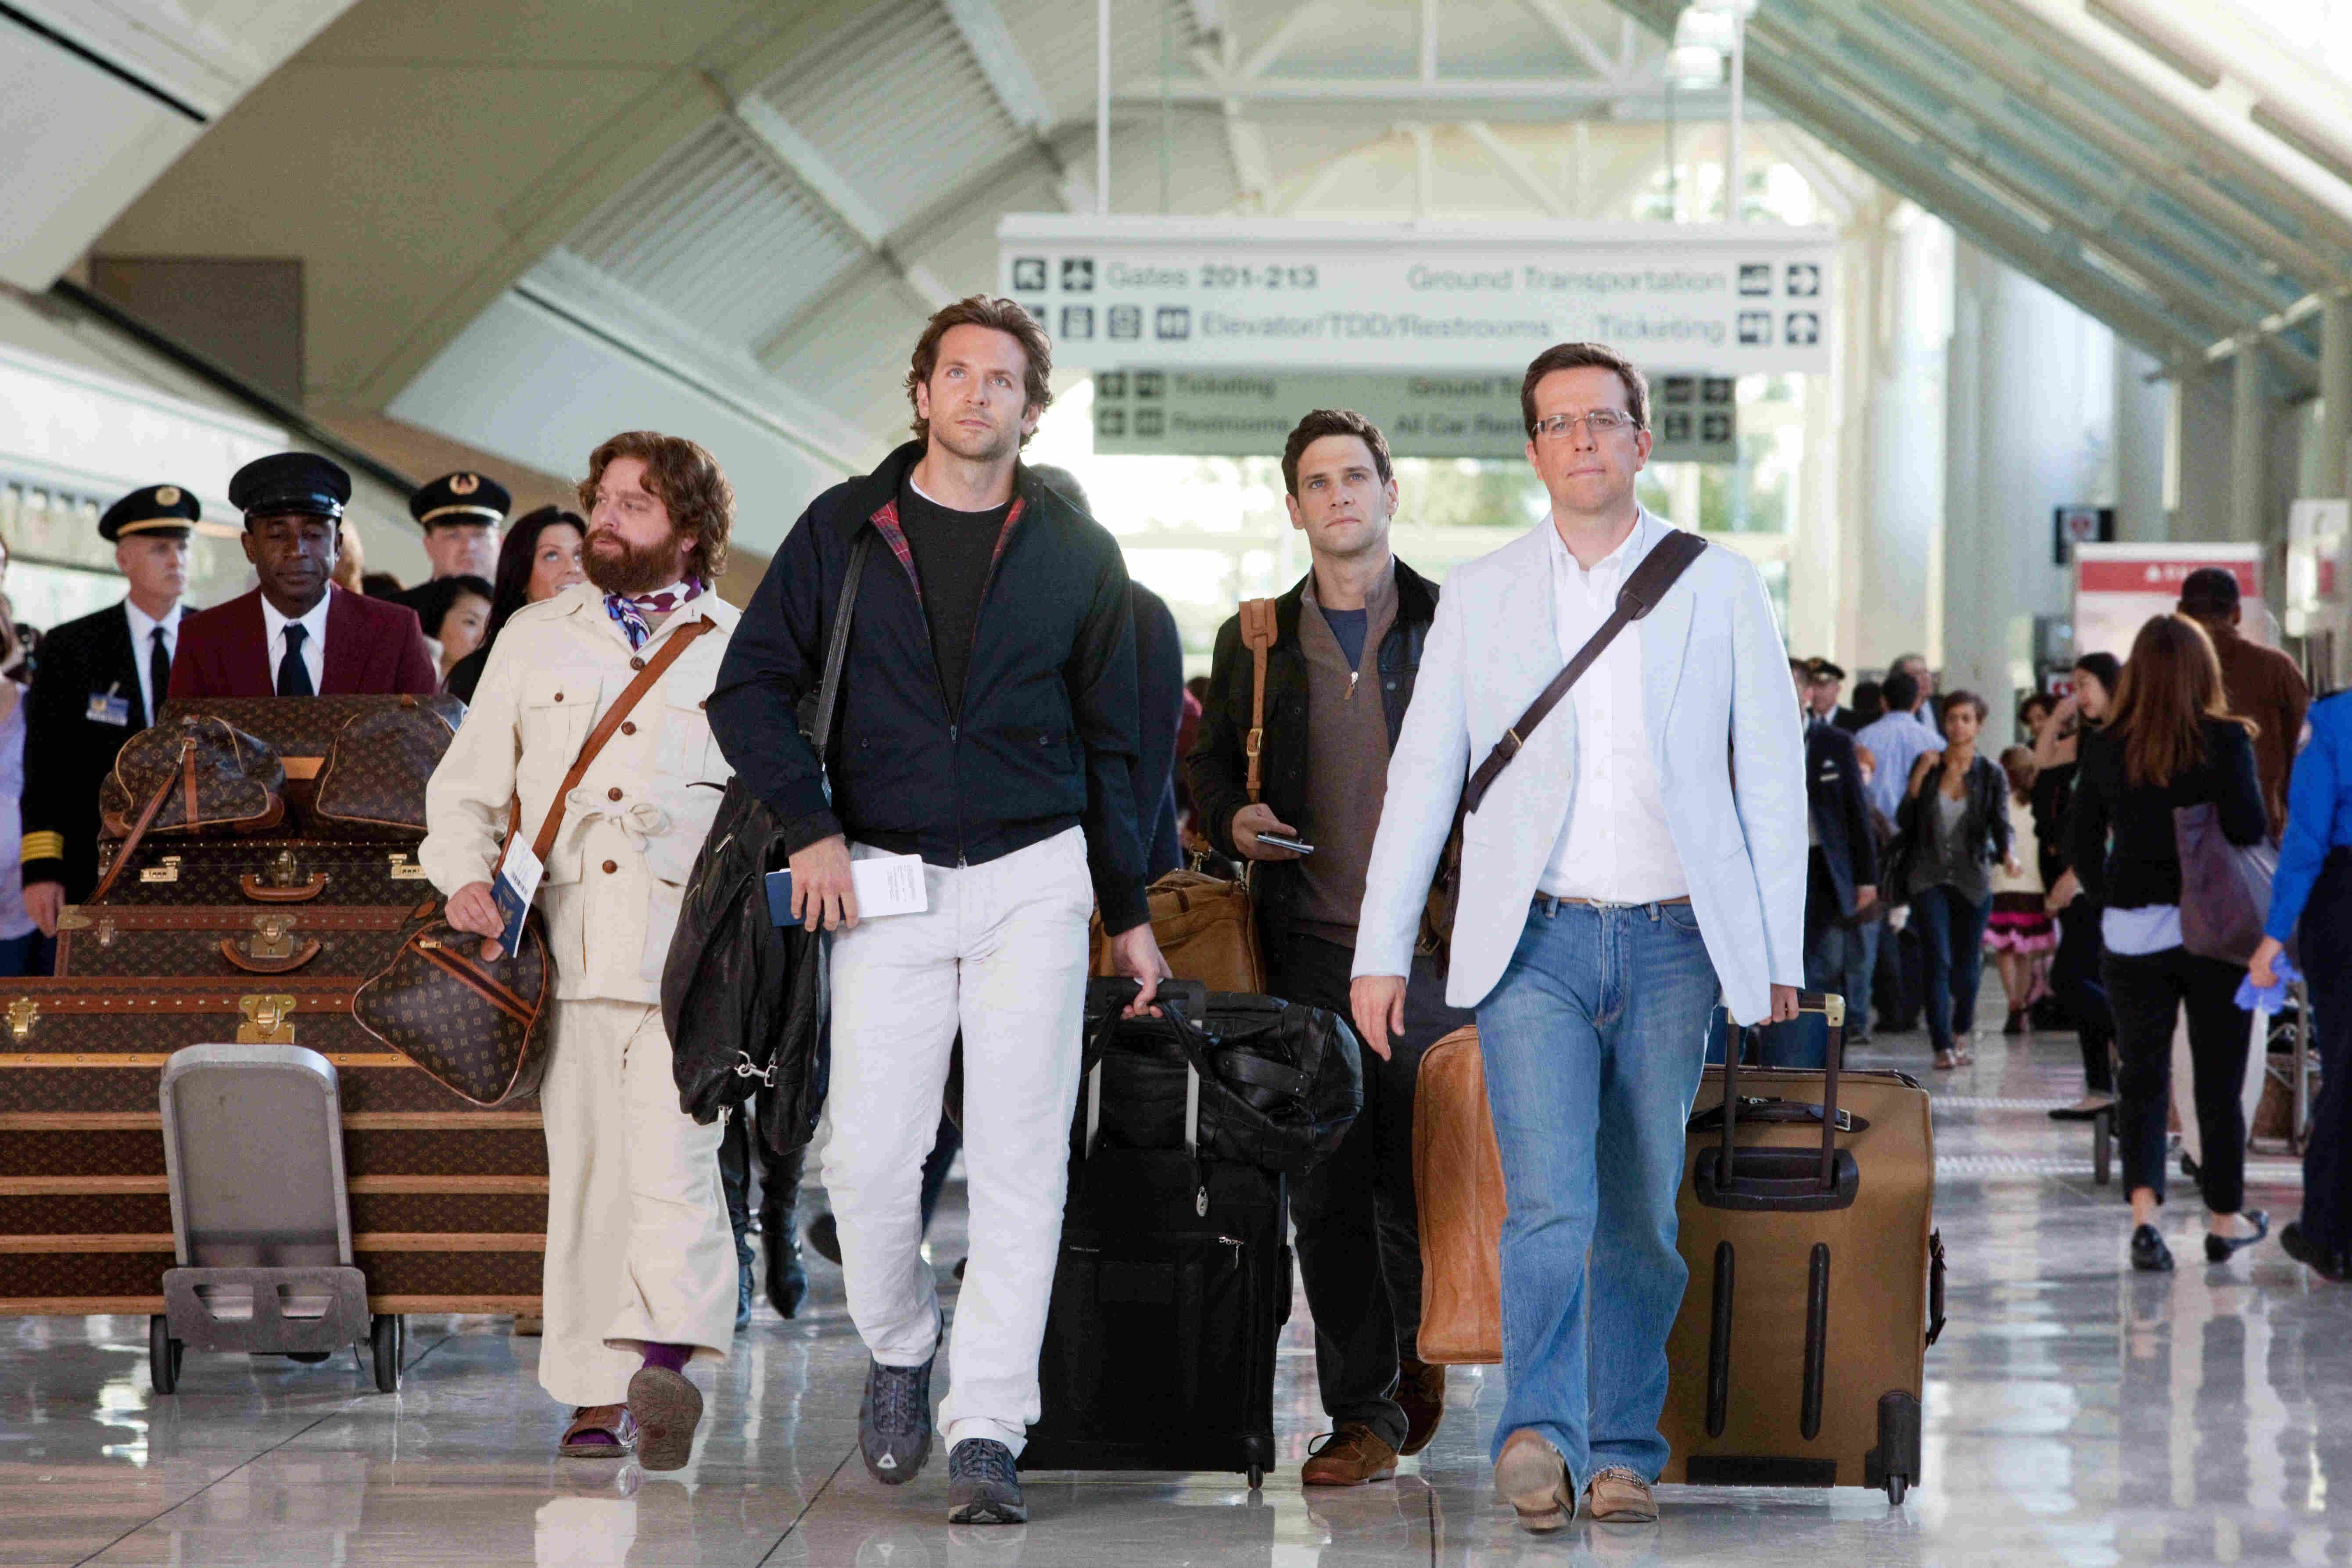 Zach Galifianakis, Bradley Cooper, Justin Bartha and Ed Helms in Warner Bros. Pictures' The Hangover Part II (2011)